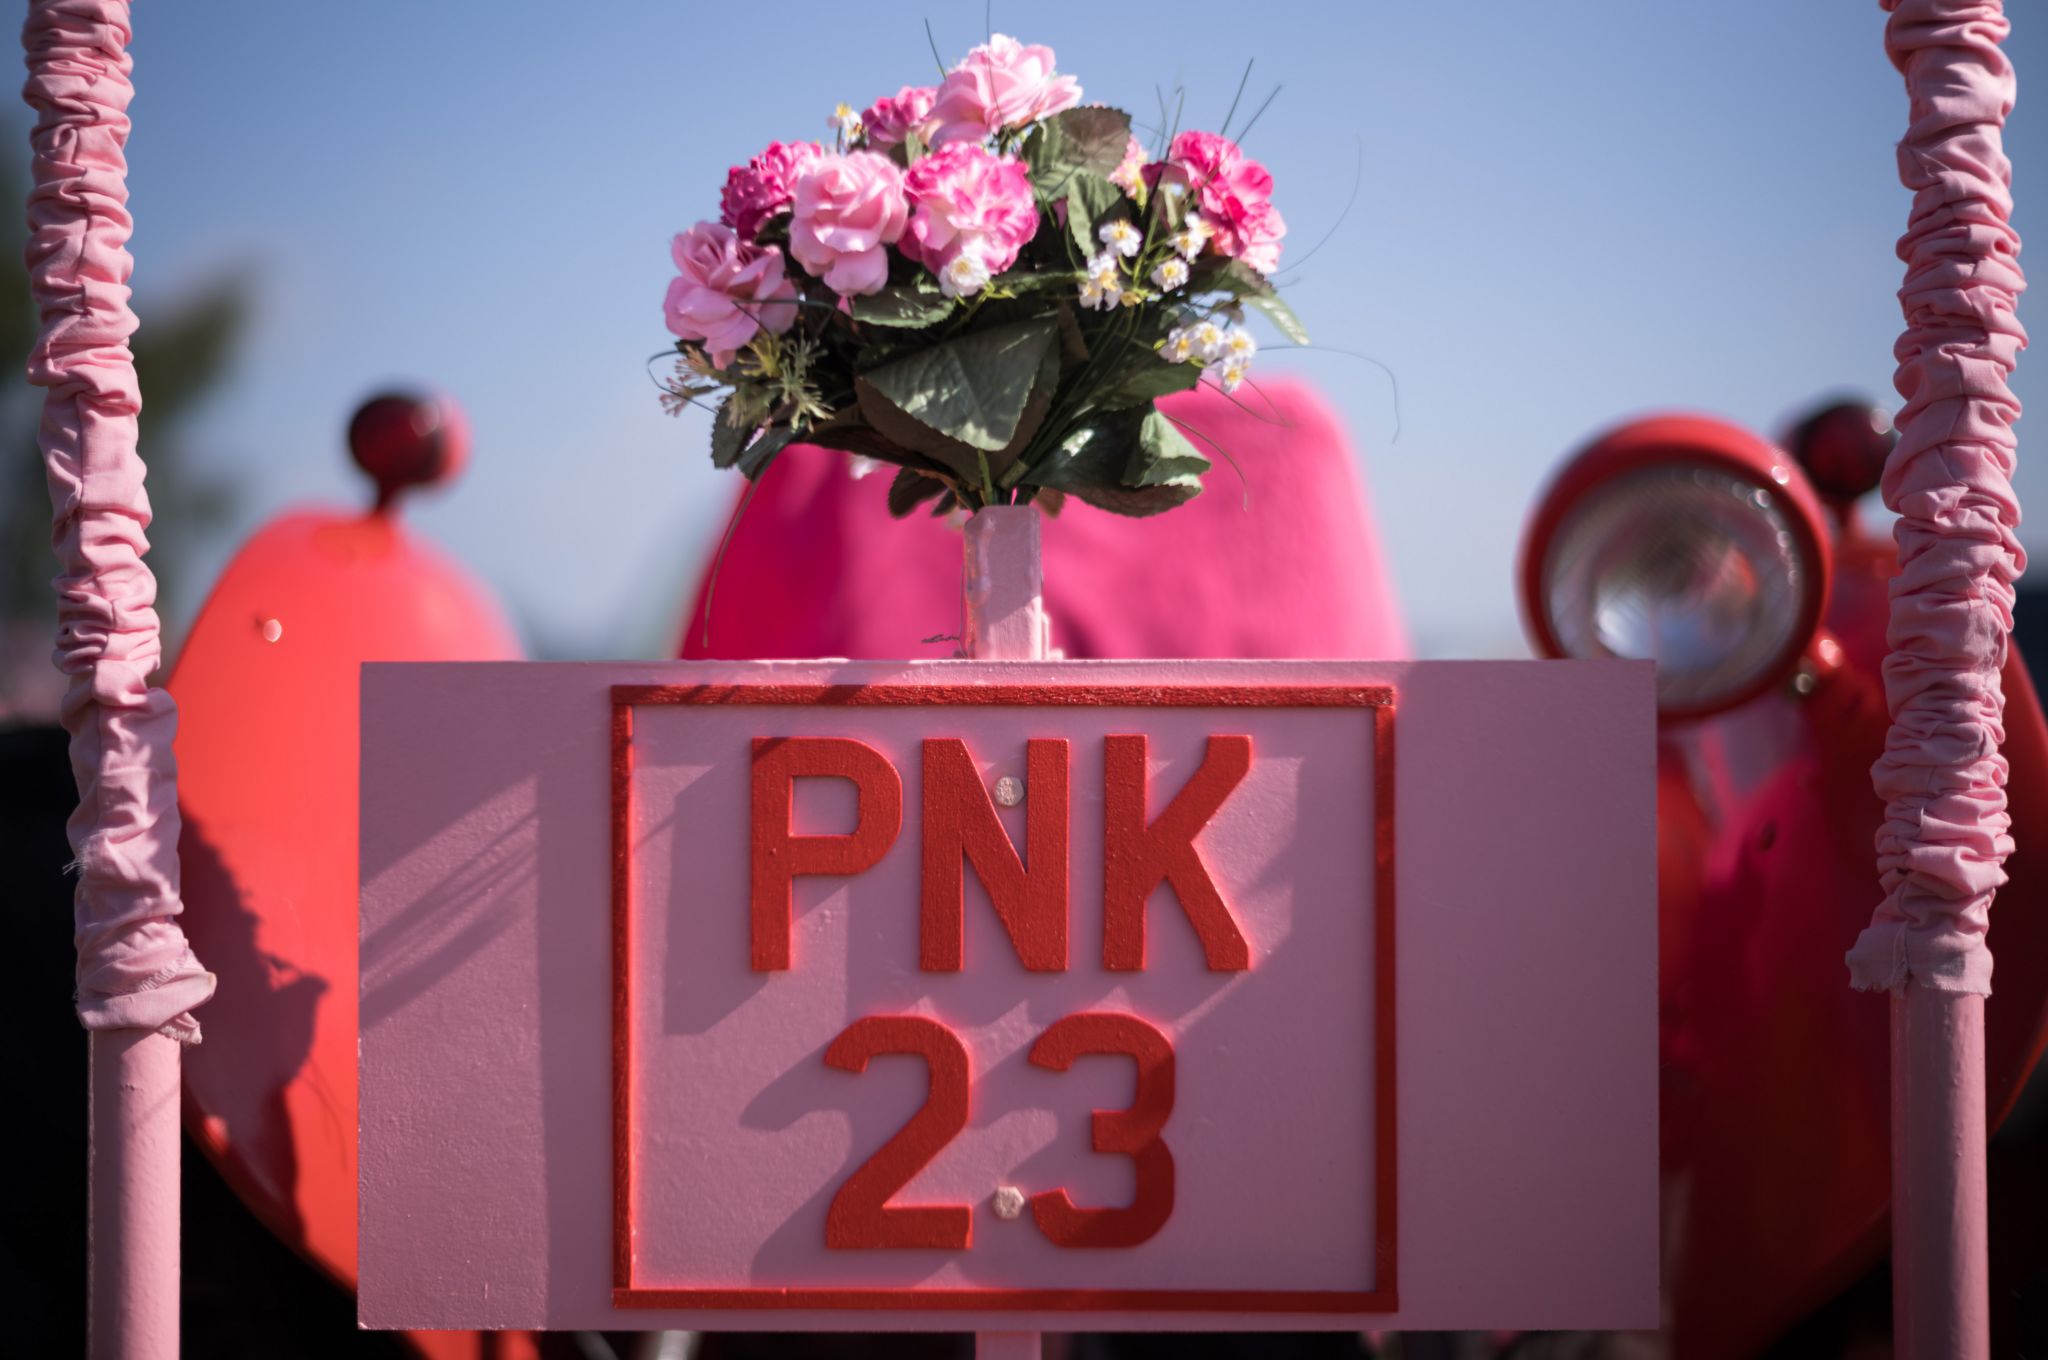 Pink tractor licence plate